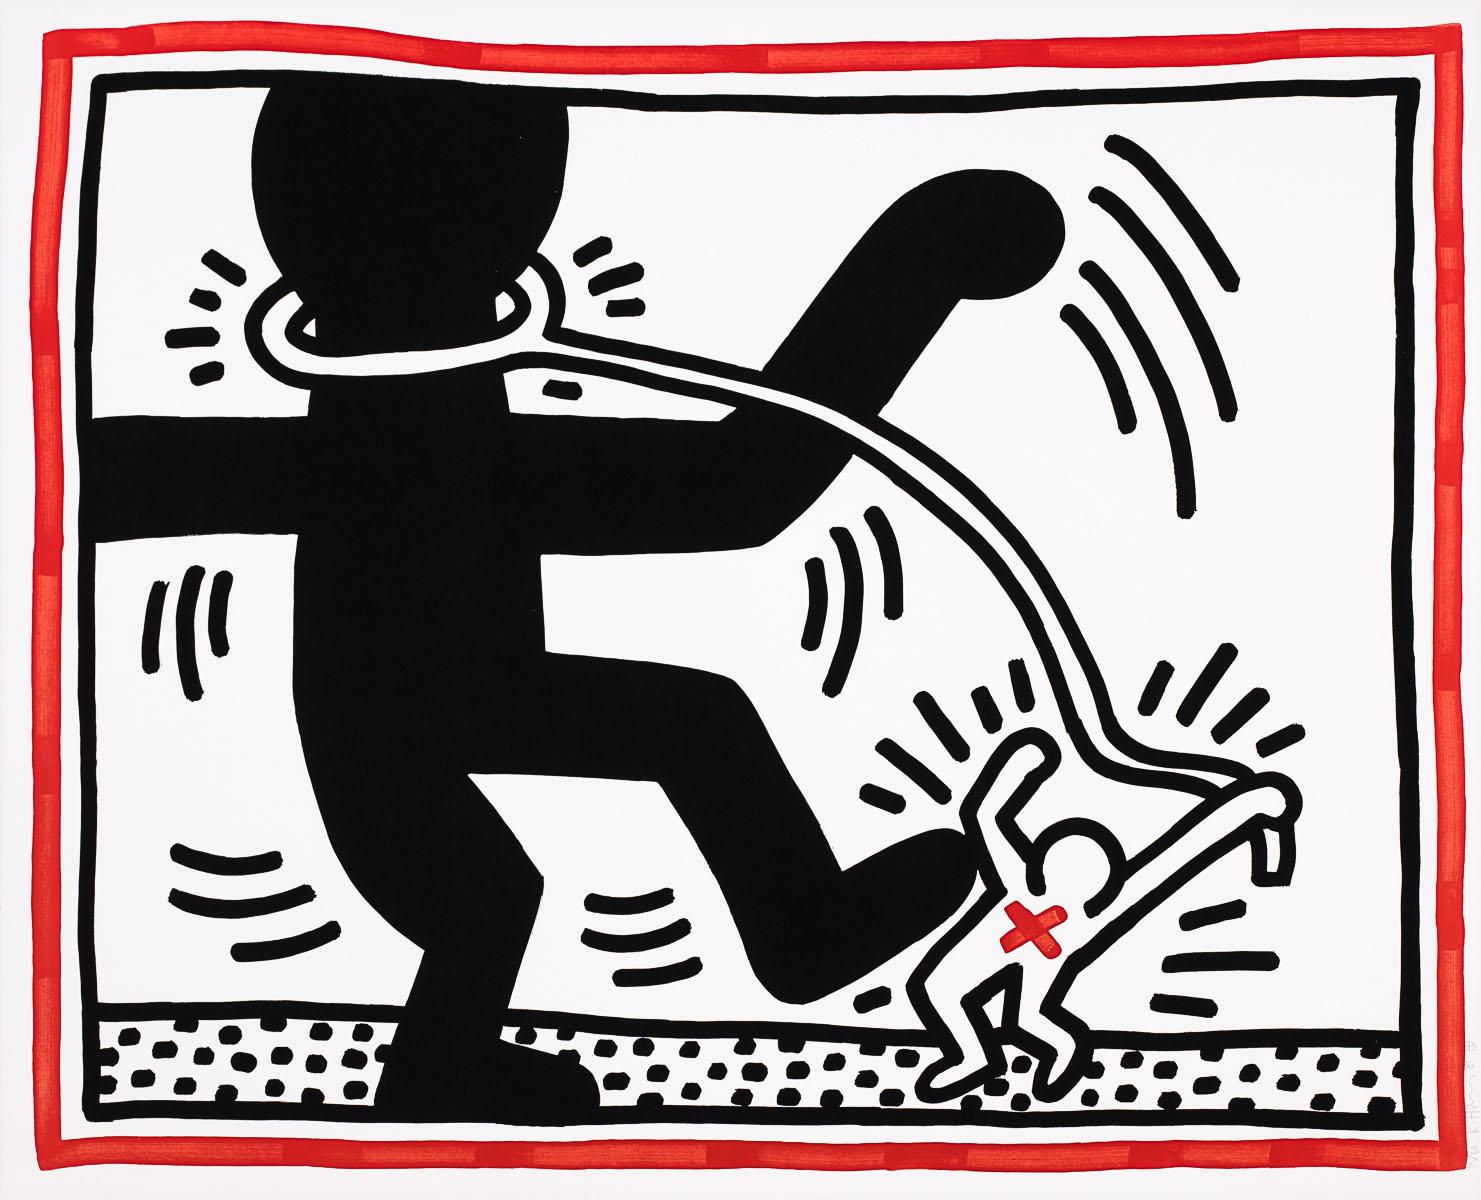 Abstract Print Keith Haring - Free South Africa, 1985 (n°2)